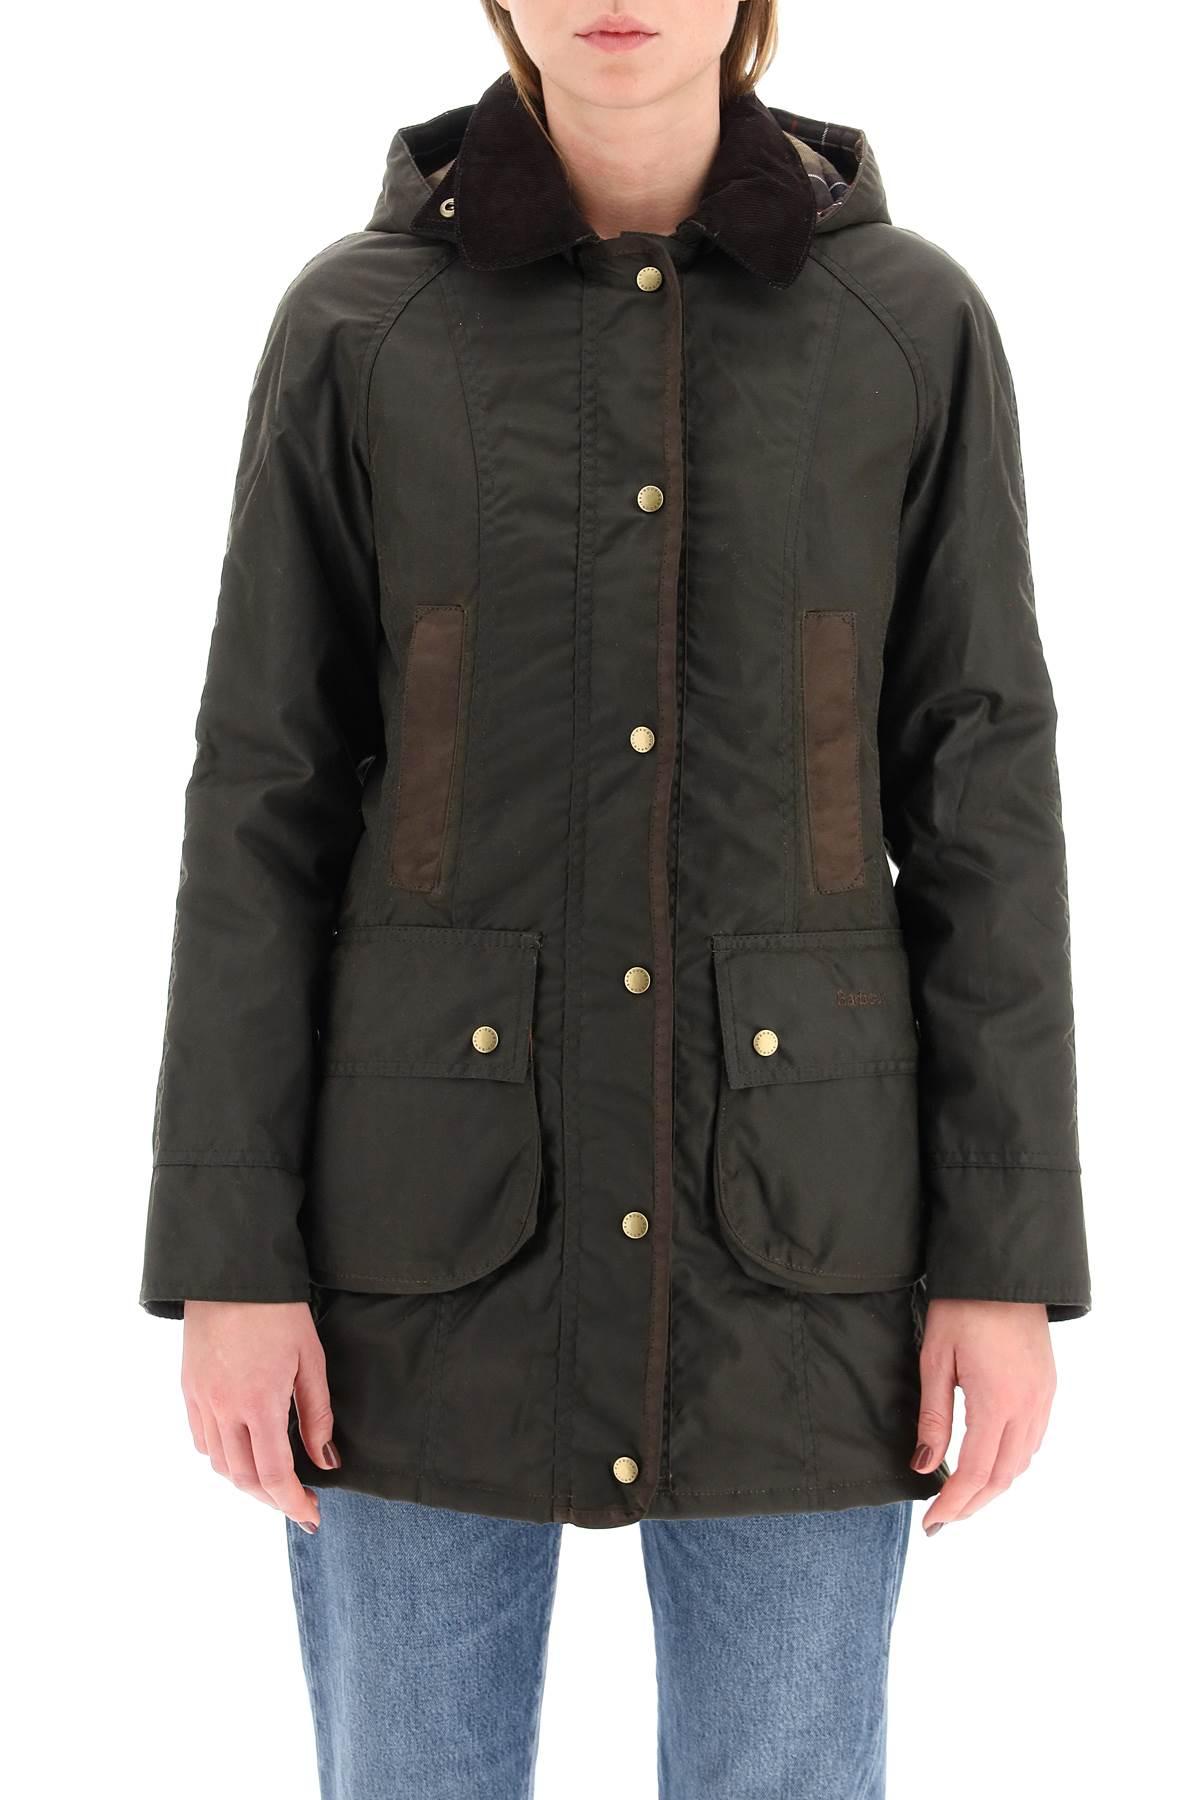 Barbour Bower Wax Jacket in Black | Lyst